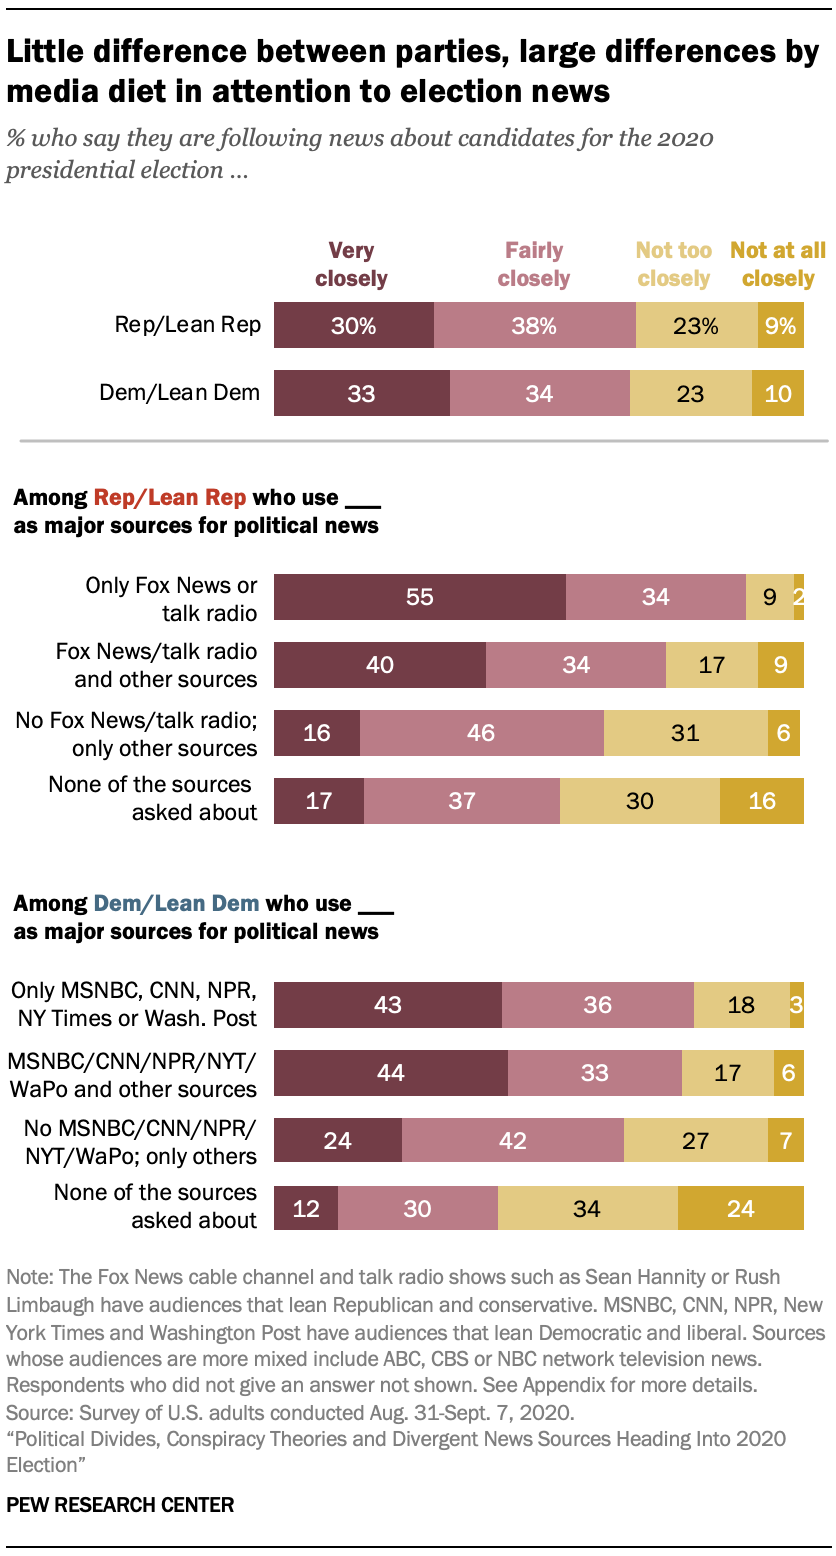 Little difference between parties, large differences by media diet in attention to election news